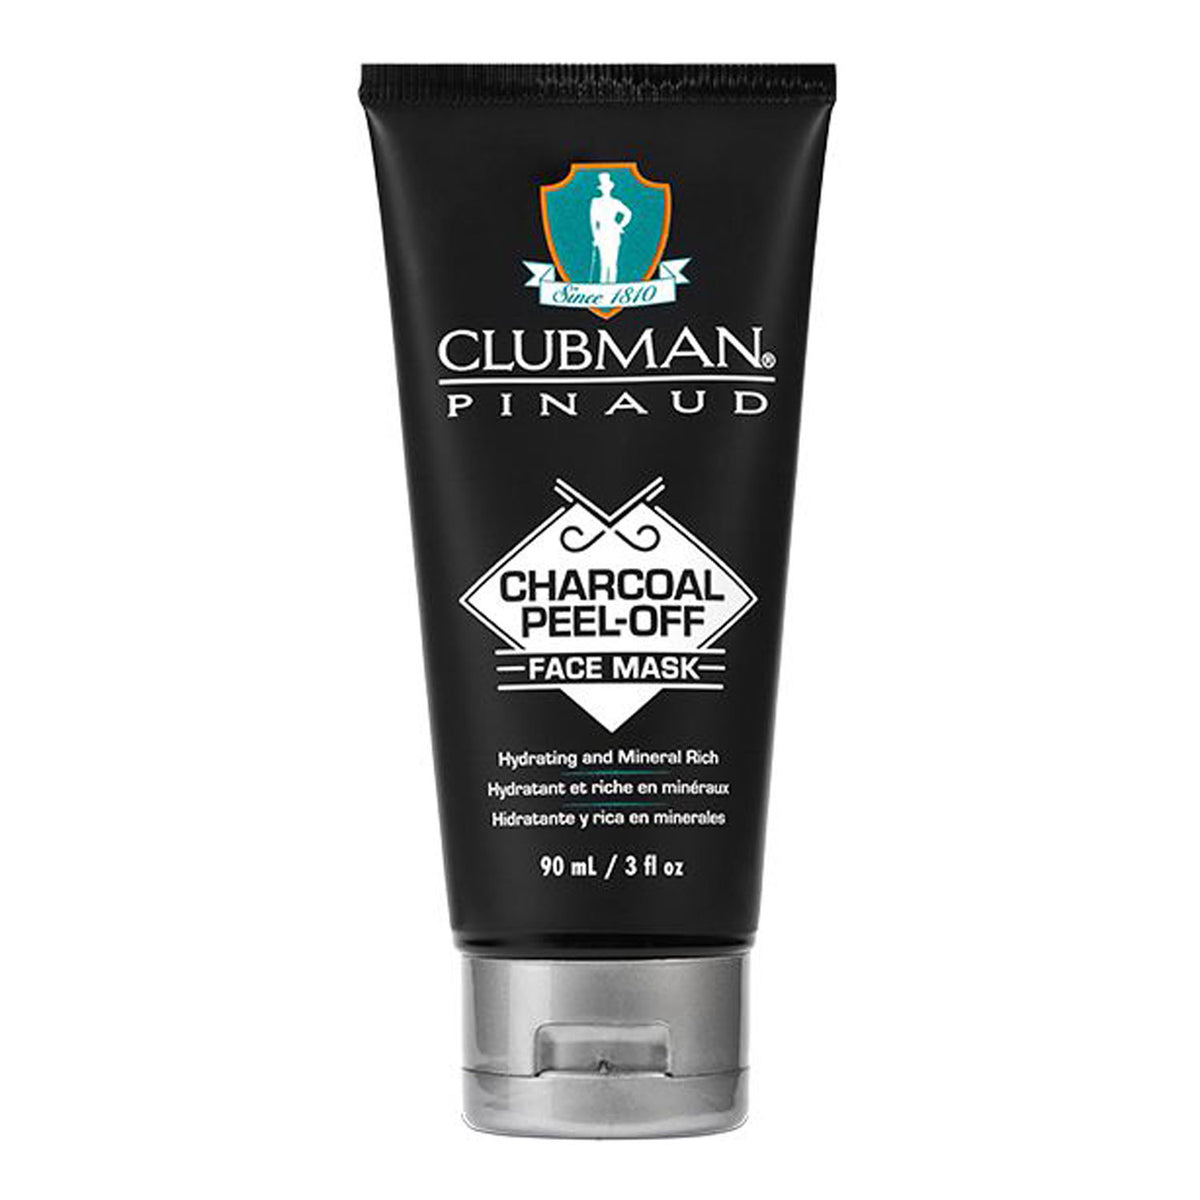 Clubman Charcoal Peel Off Face Mask 90ml - Orcadia